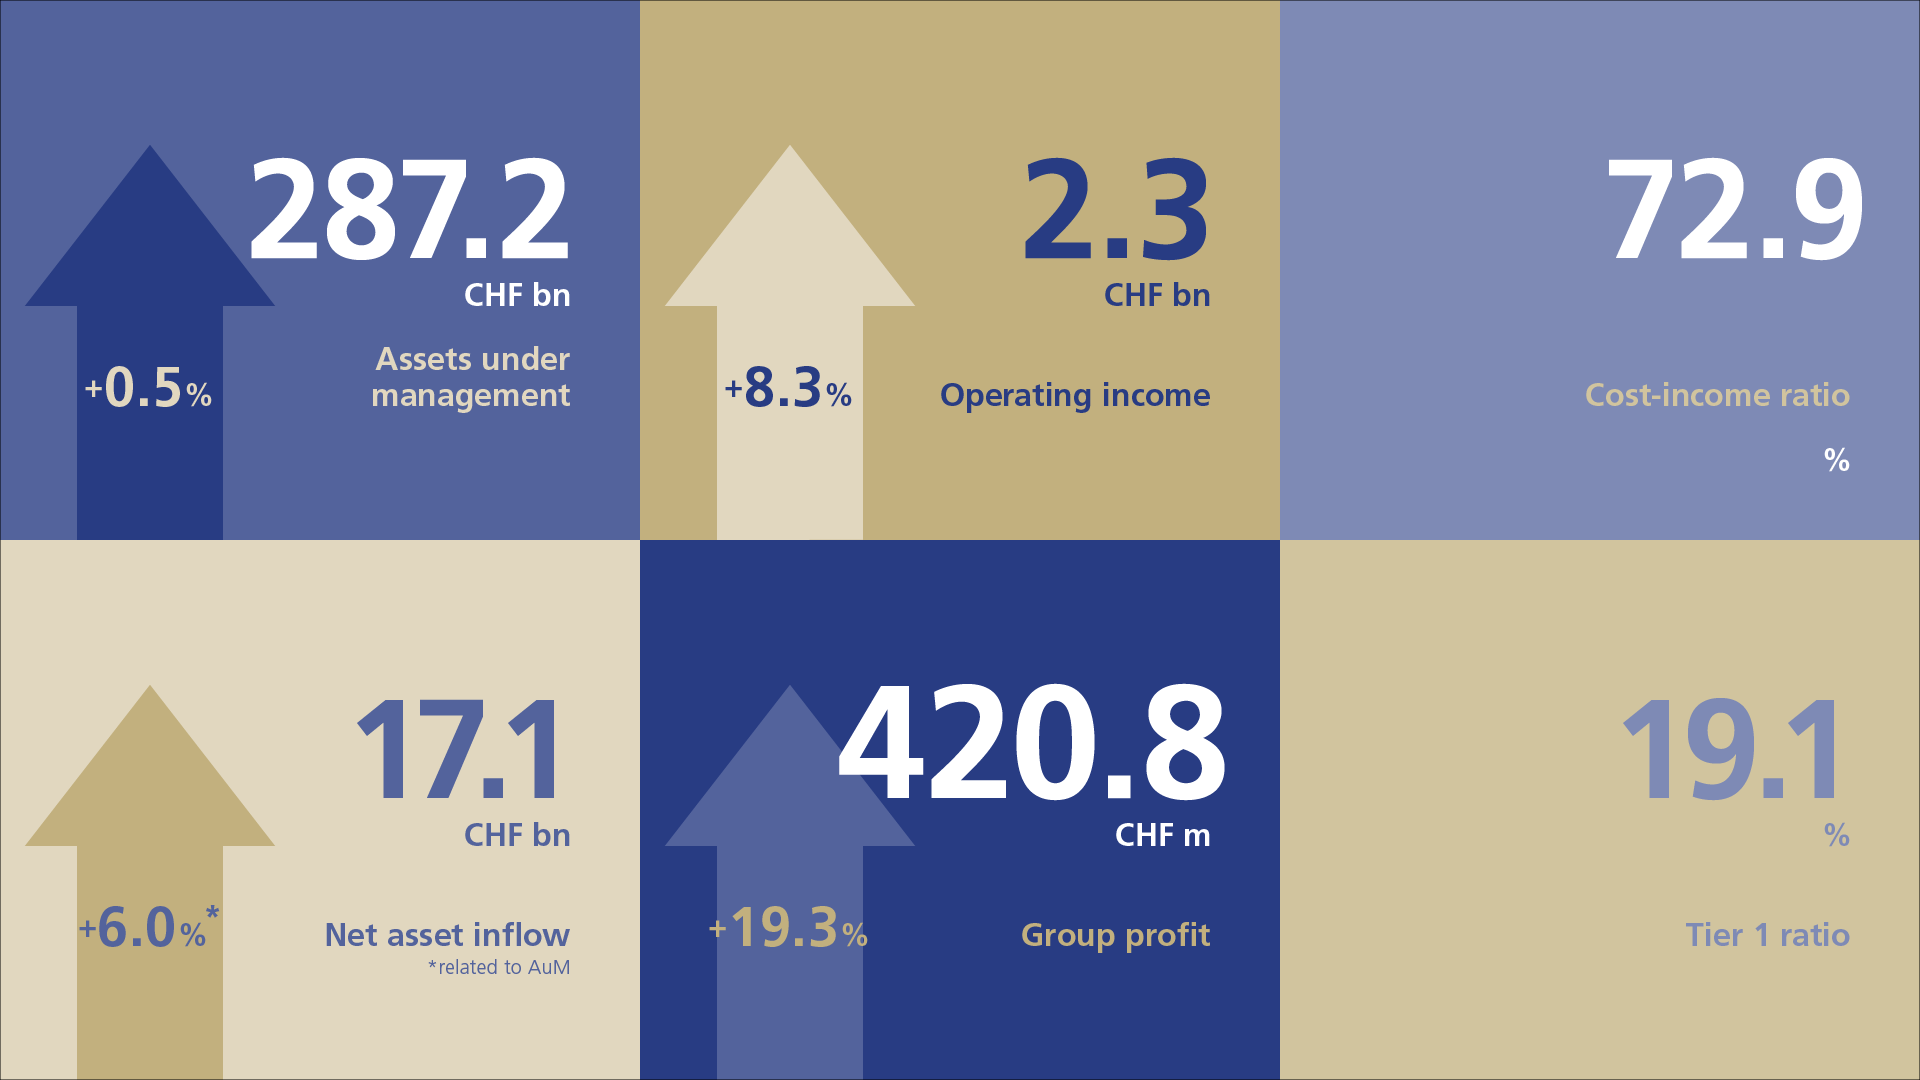 Highlights from LGT's 2022 annual results.